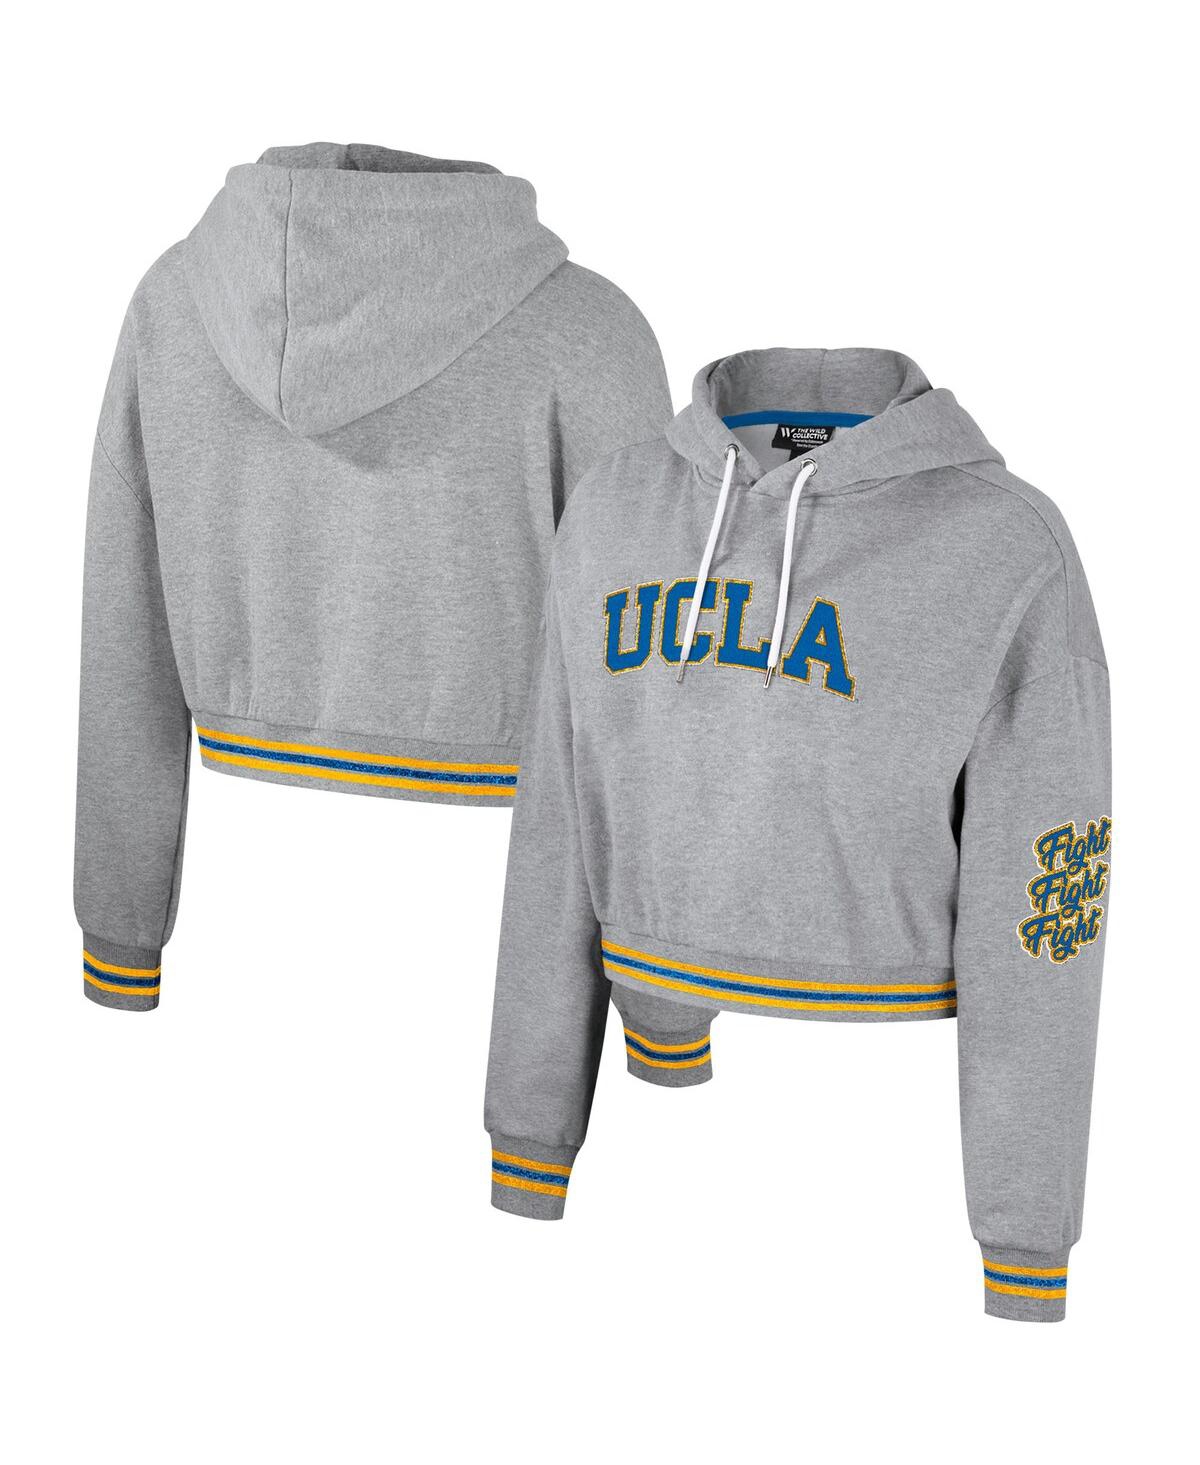 Women's The Wild Collective Heather Gray Distressed Ucla Bruins Cropped Shimmer Pullover Hoodie - Heather Gray